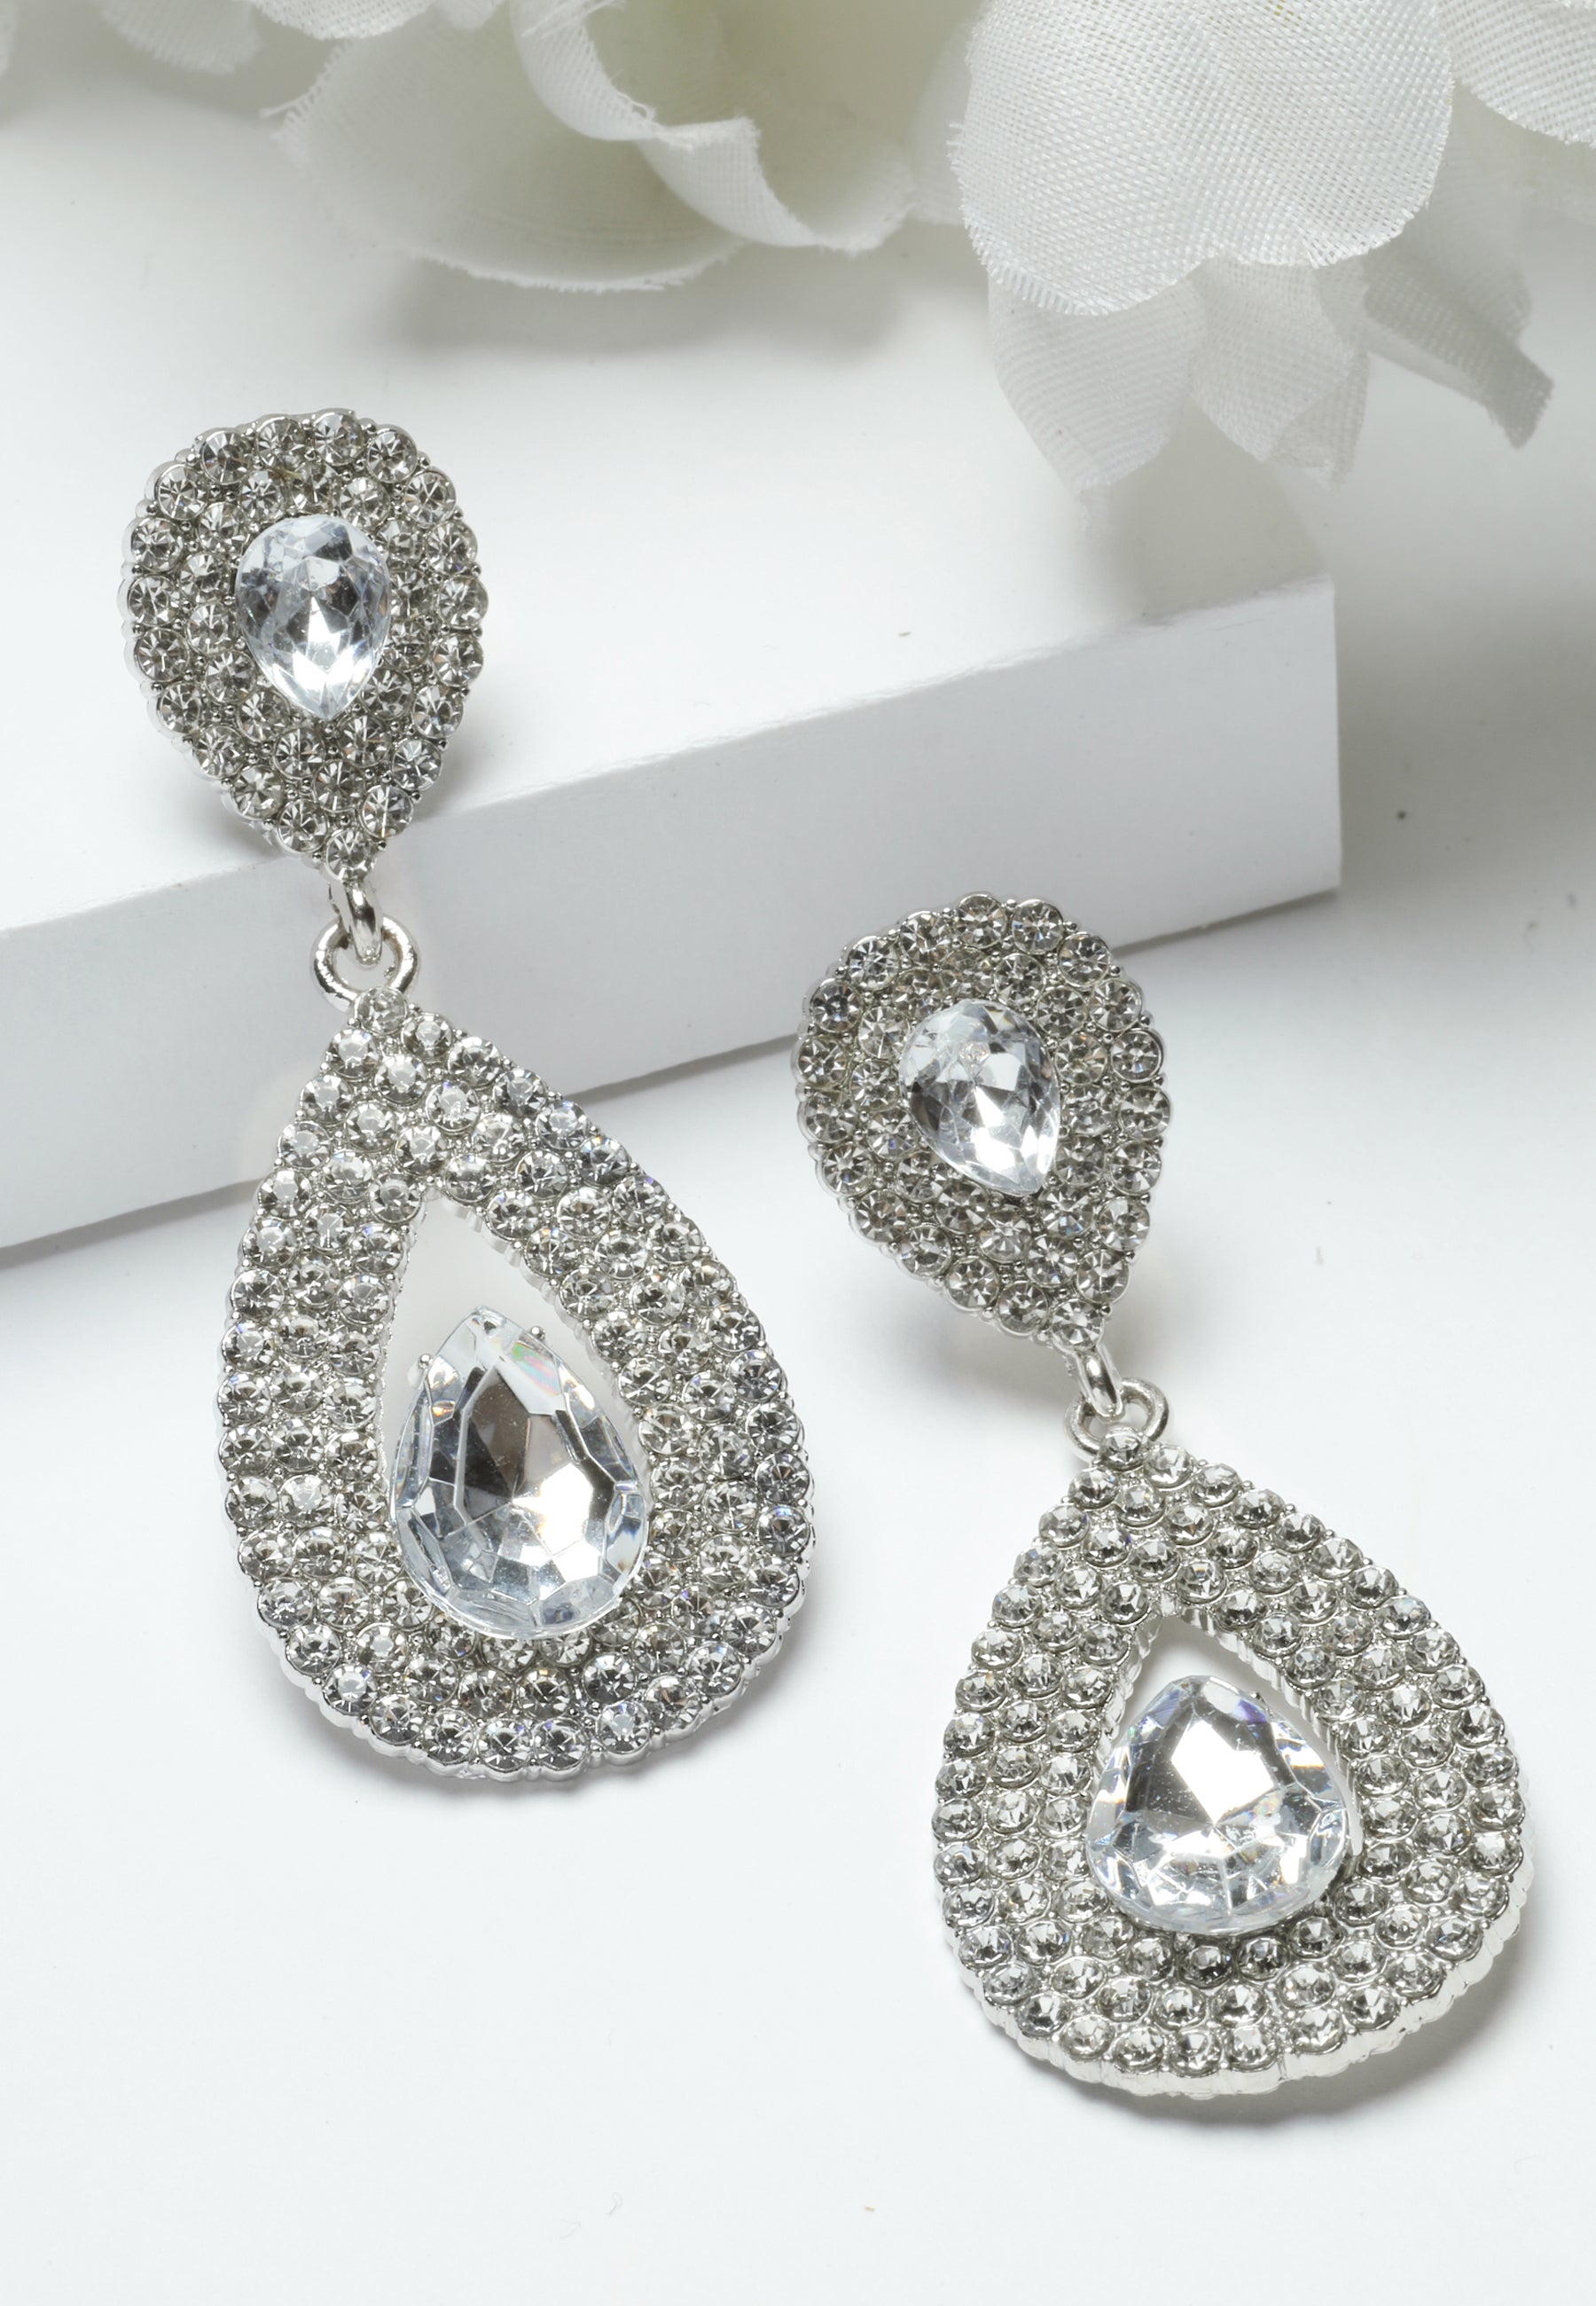 Earrings Criostail Droplet Uisce-Daite Airgid